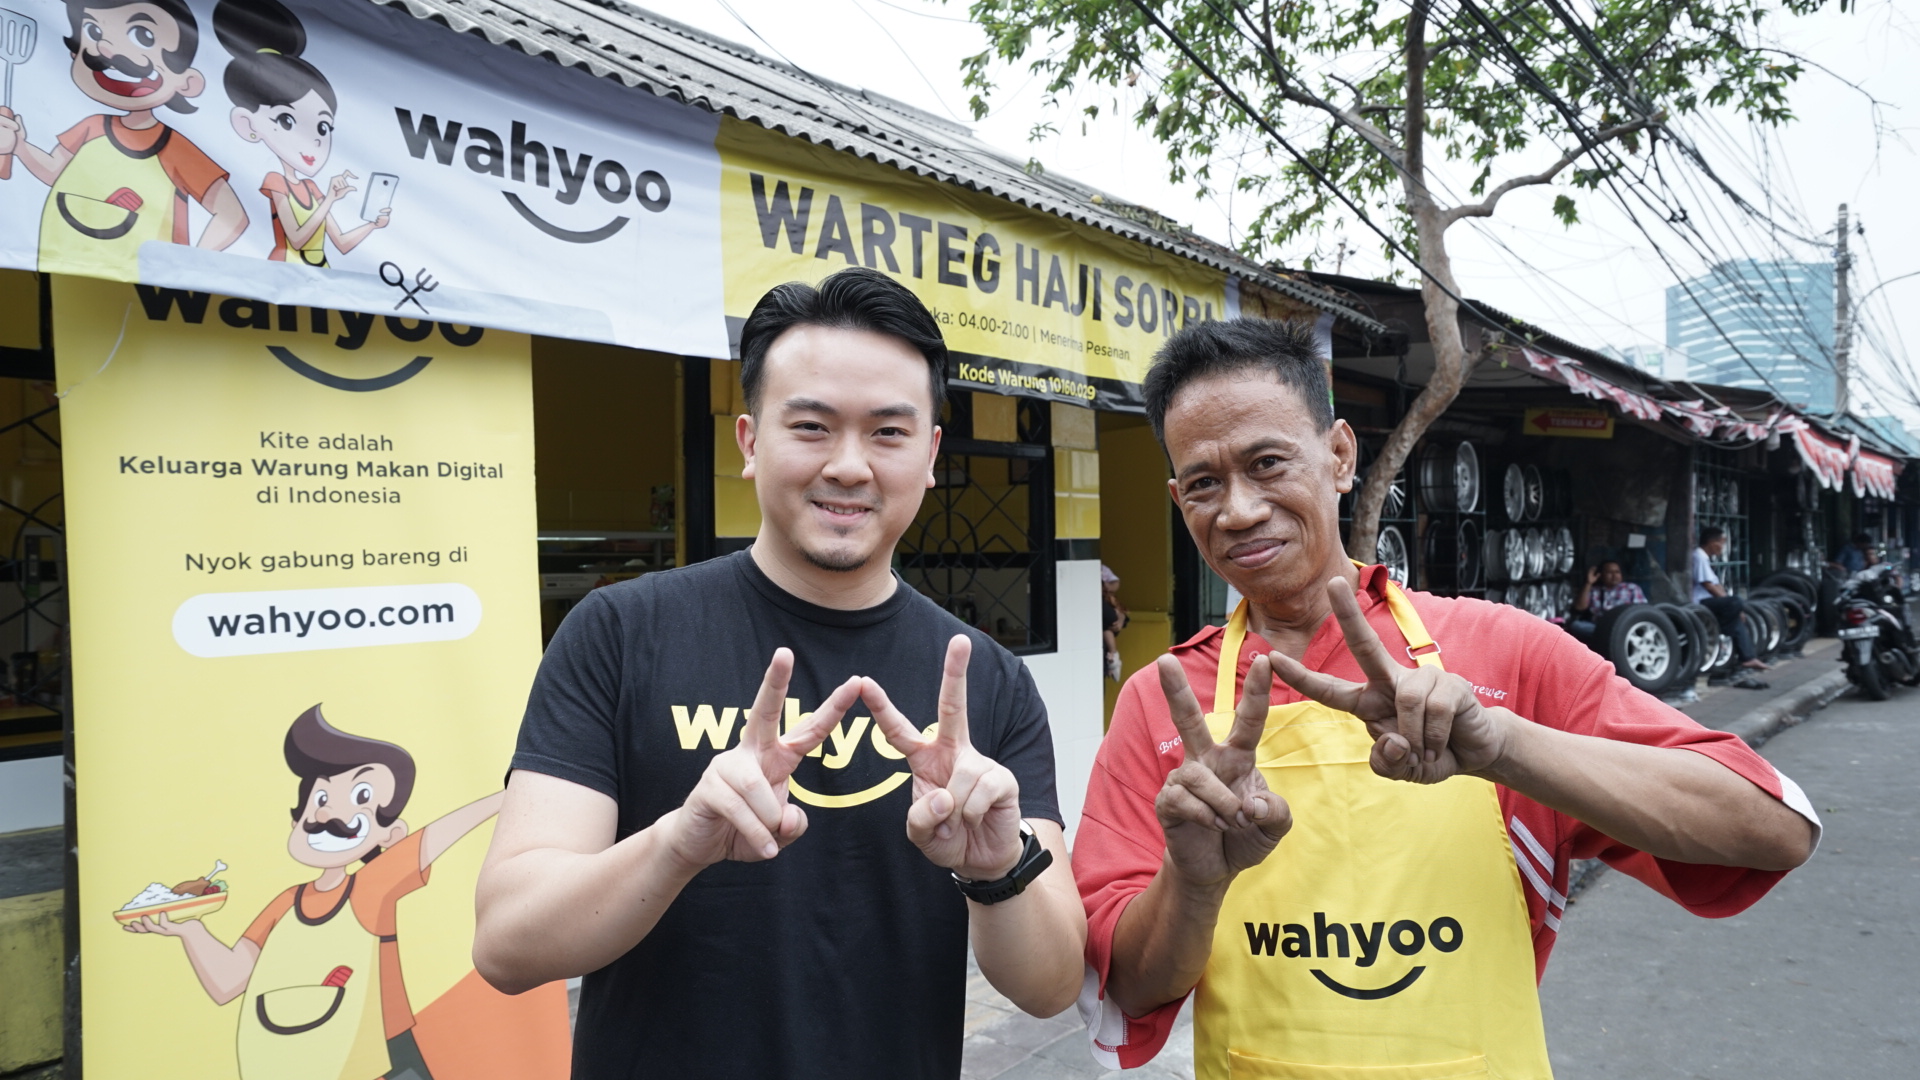 Wahyoo takes Indonesian street food eateries to the next level: Startup Stories